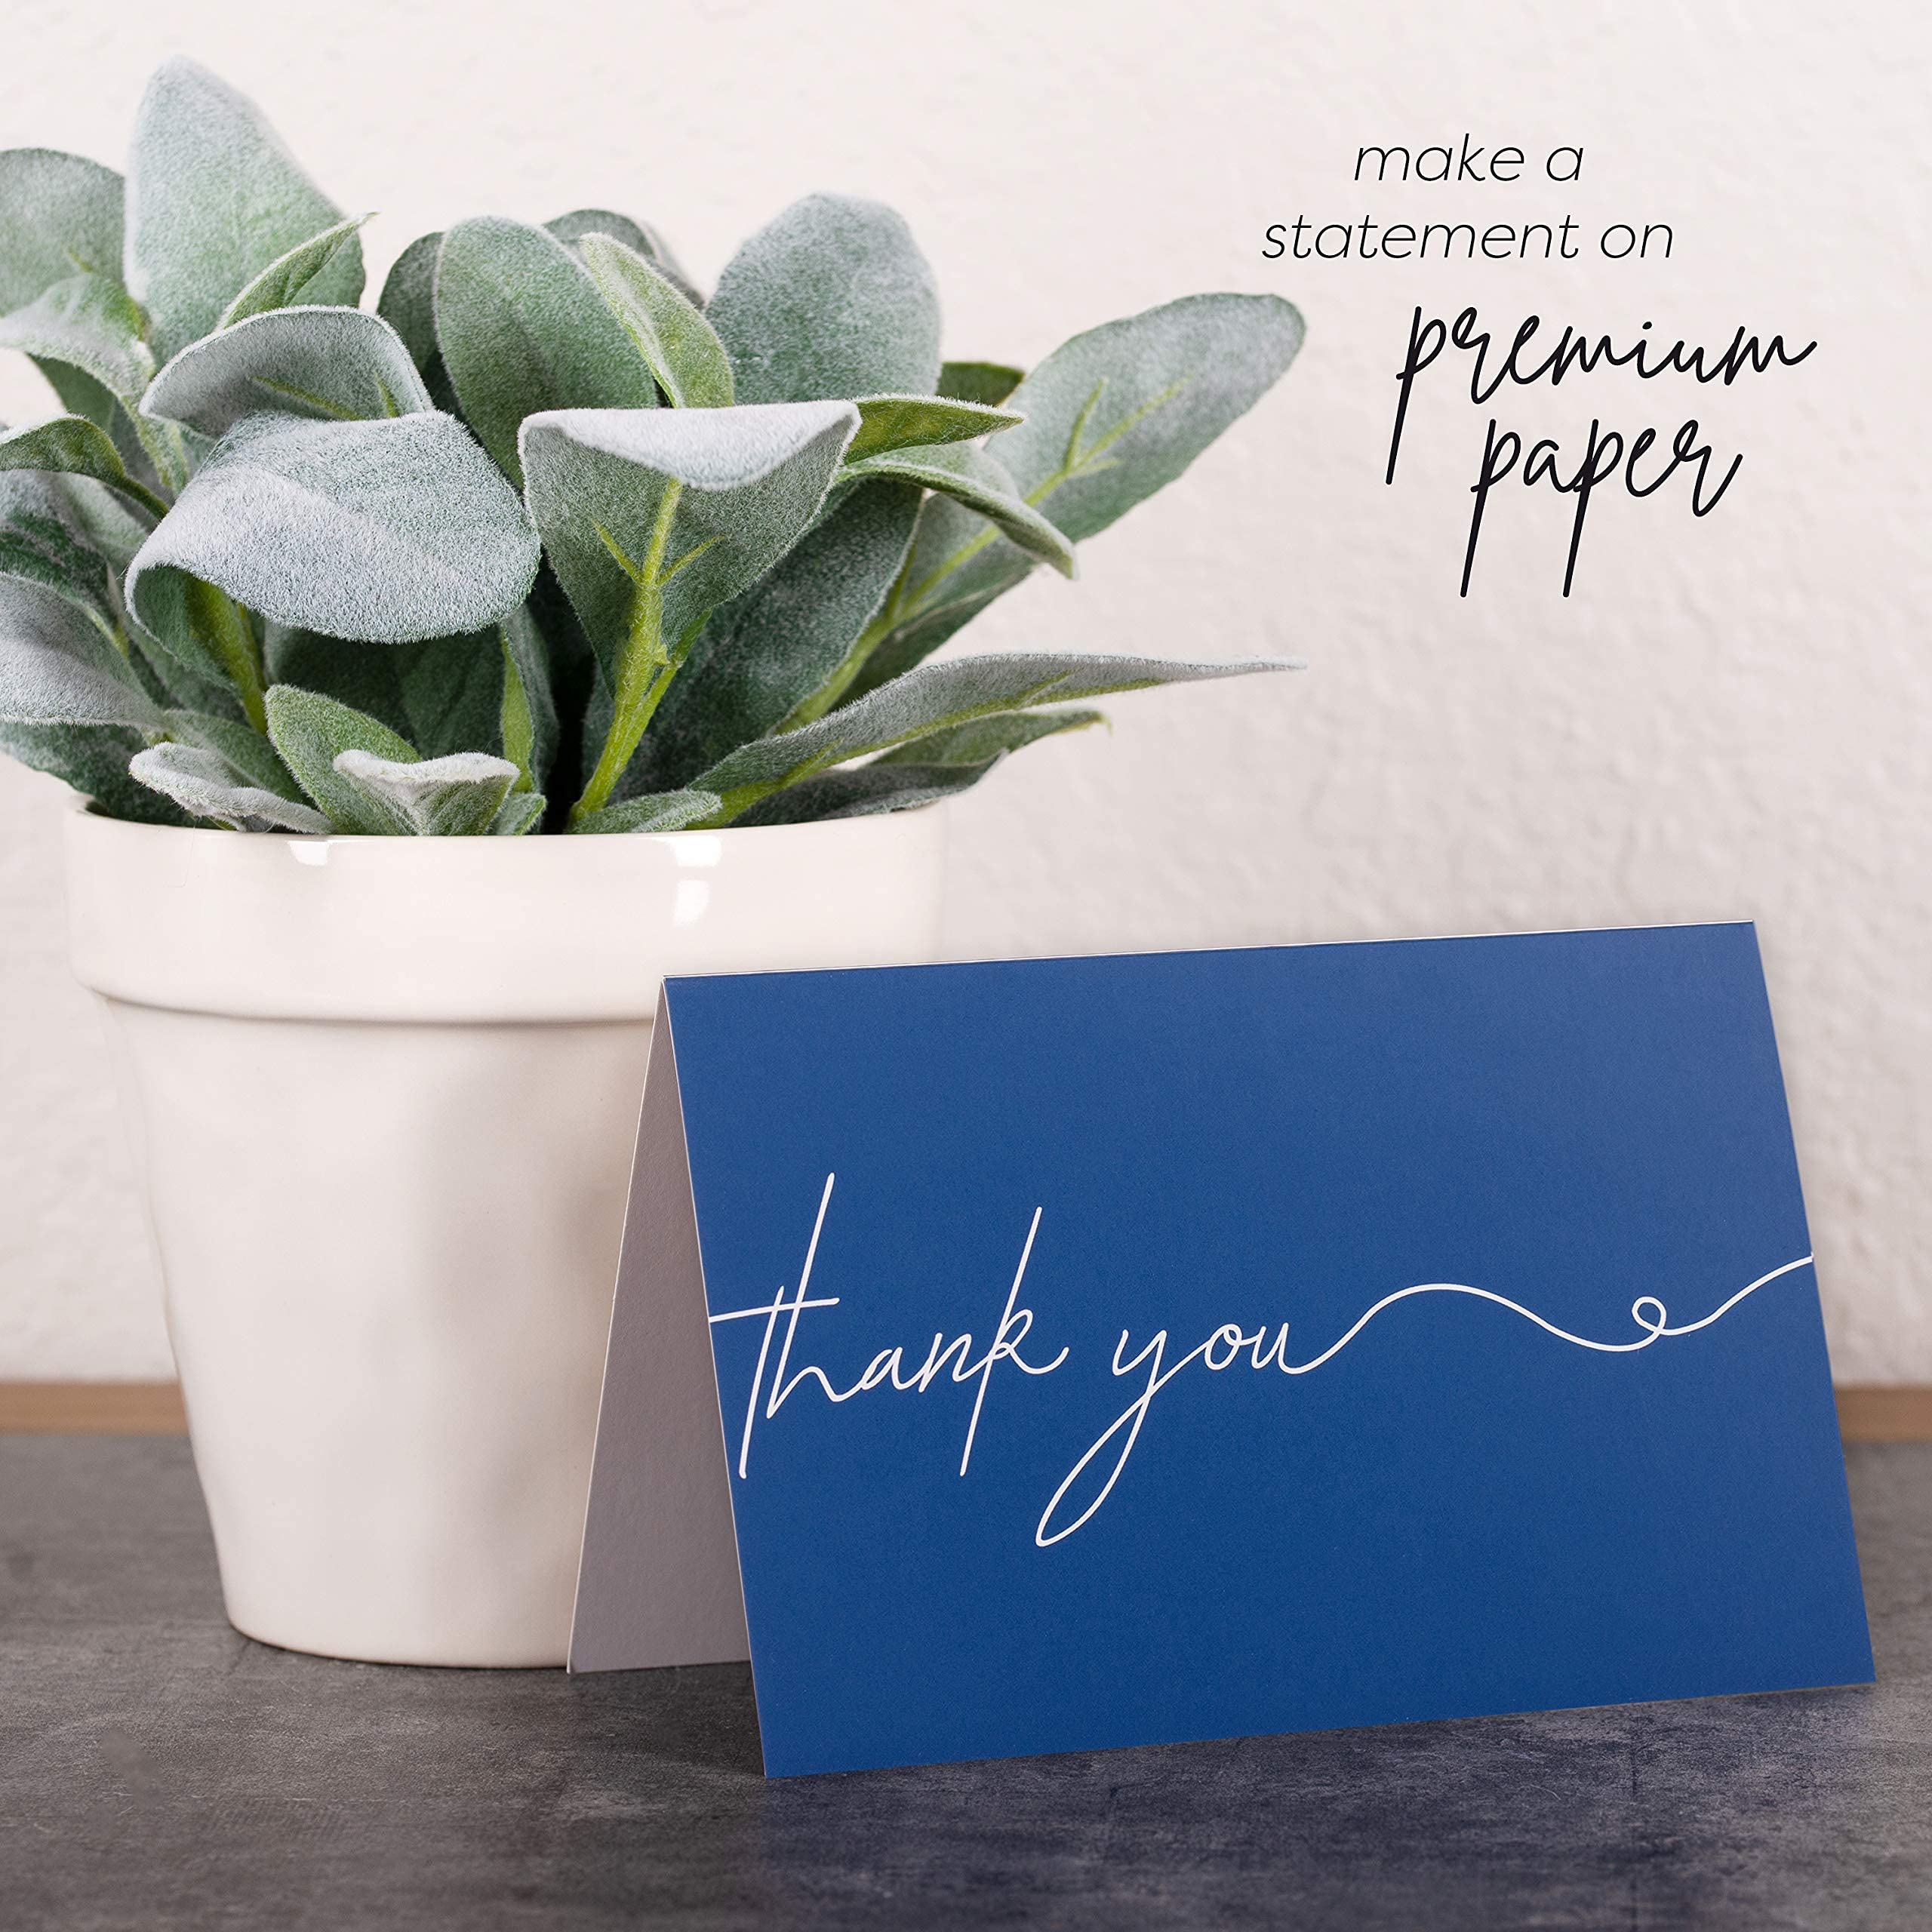 120 Thank You Notes with Envelopes Set for a Personal Touch - Blank Thank You Cards With Envelopes & Stickers - Navy Blue Personalized Bulk Thank You Cards Set - Classic, Professional & Simple - 4 x 6